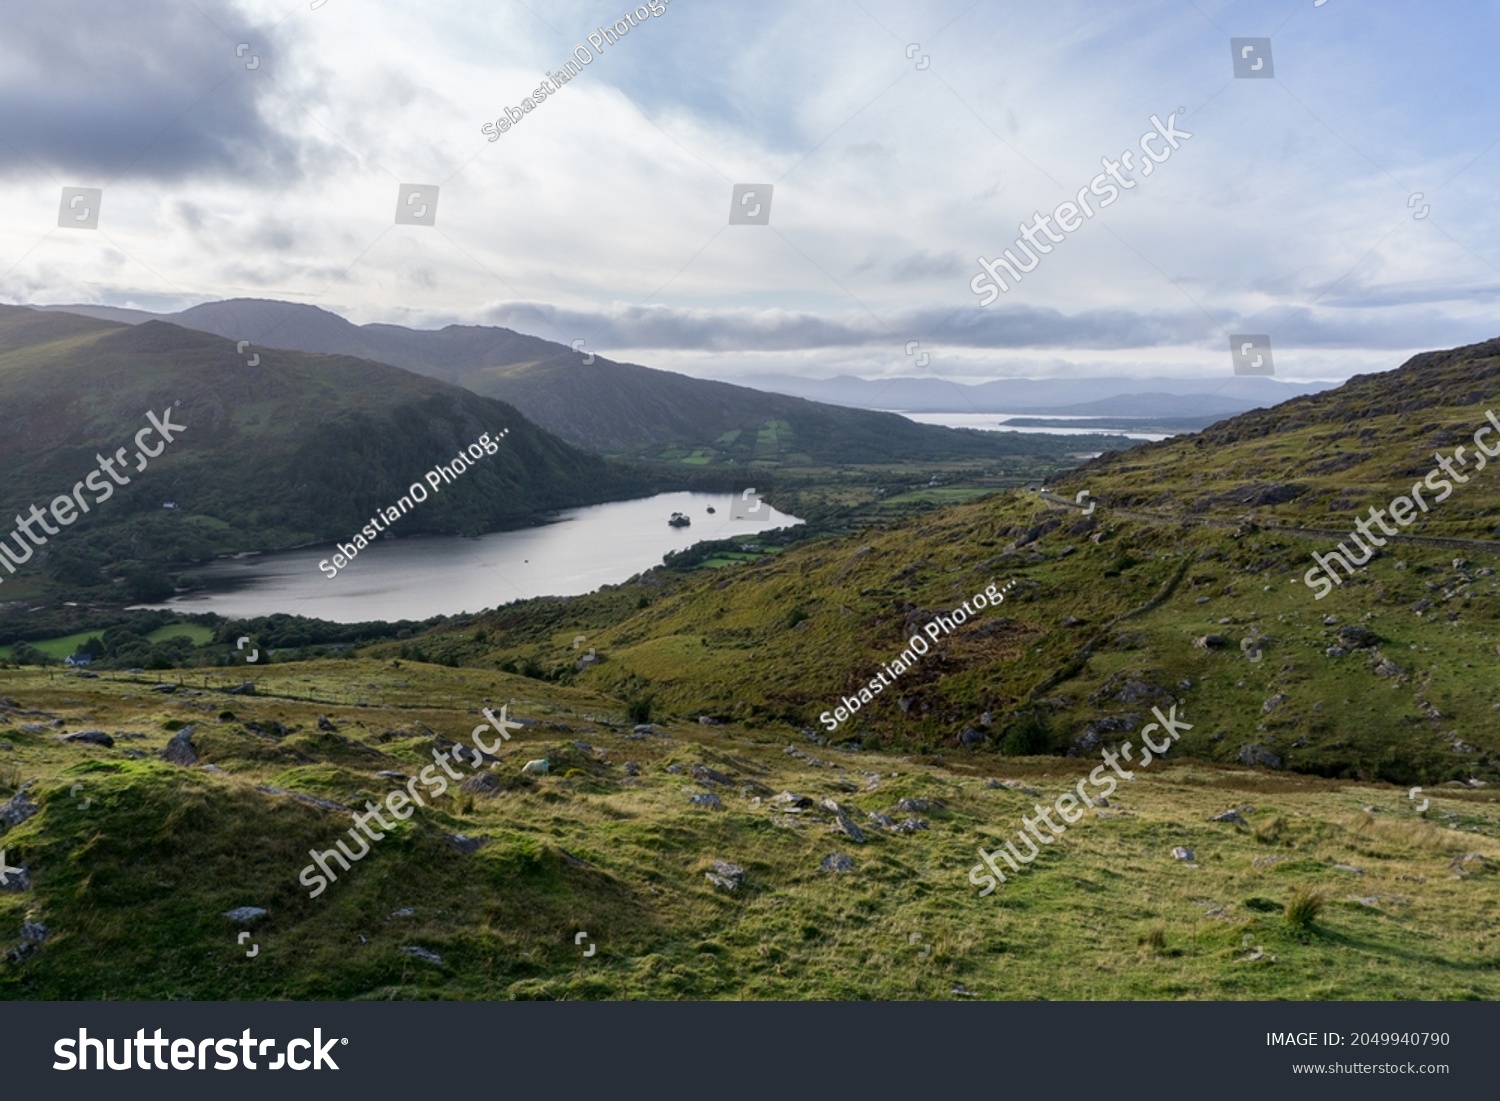 panorama view over lake and mountains in kerry, ireland #2049940790